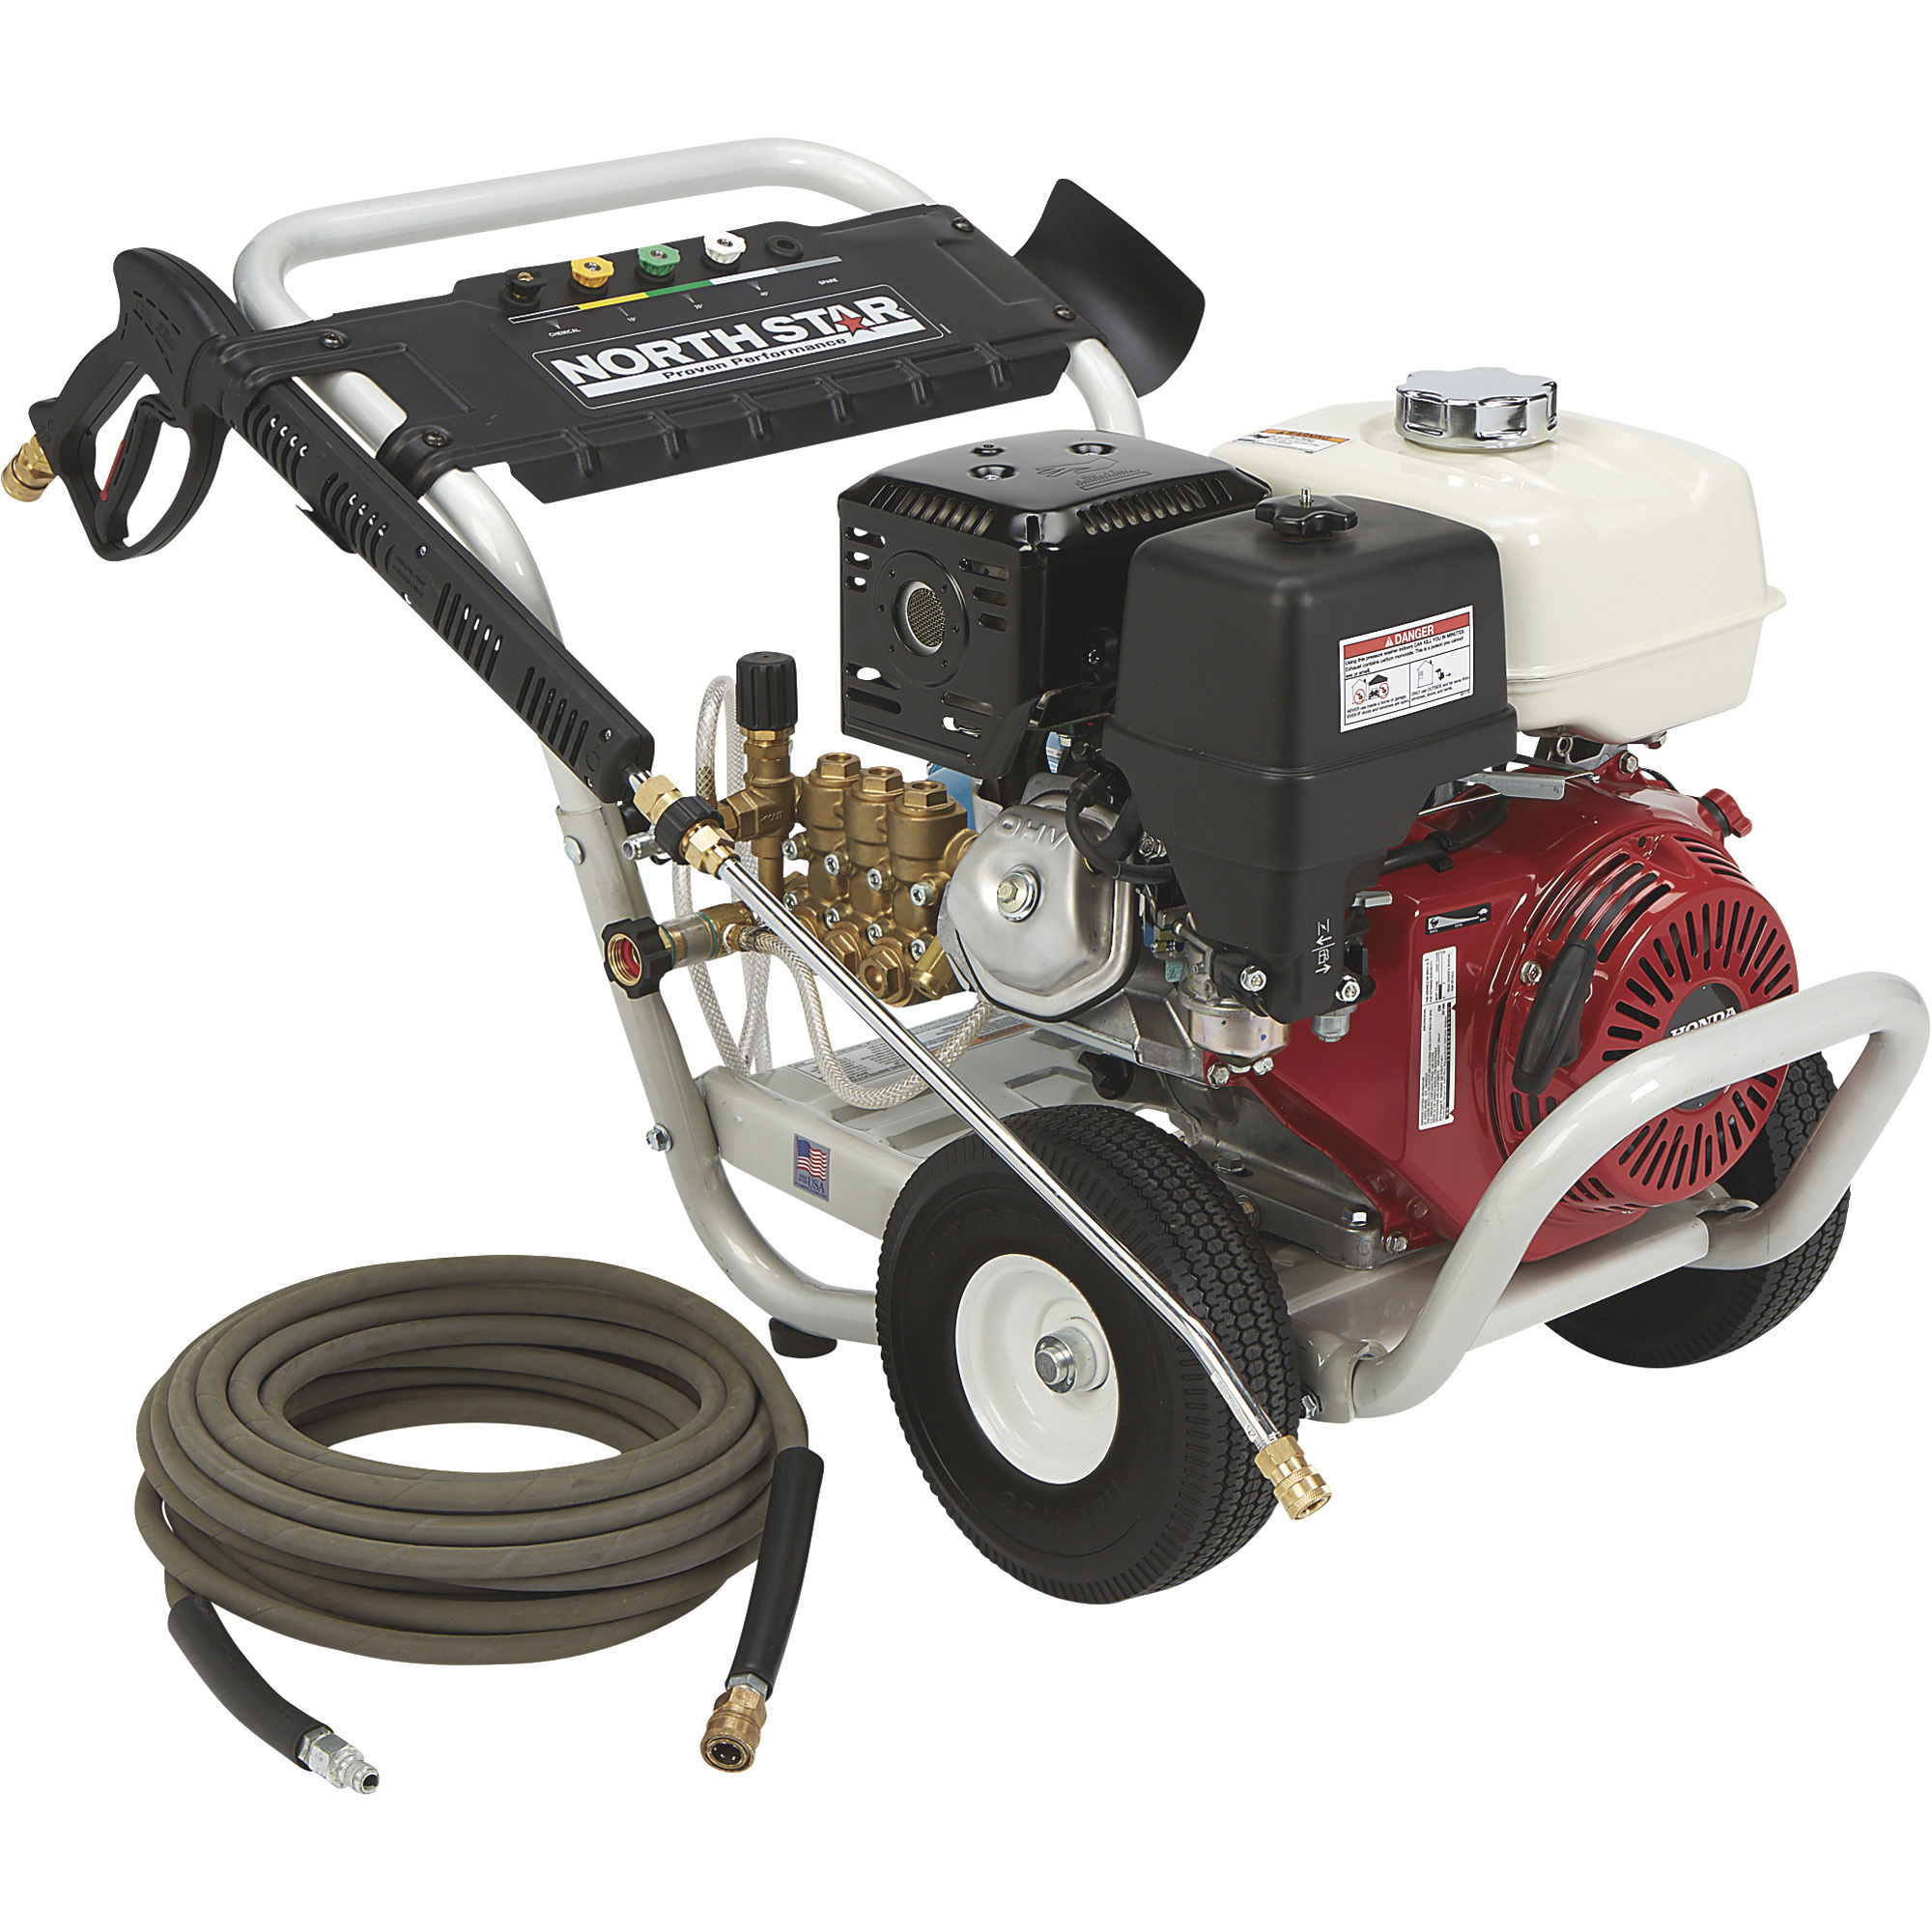 NorthStar Gas Cold Water Pressure Washer, 4200 PSI, 3.5 GPM, Honda Engine, Aircraft-Grade Aluminum Frame, Model 157133